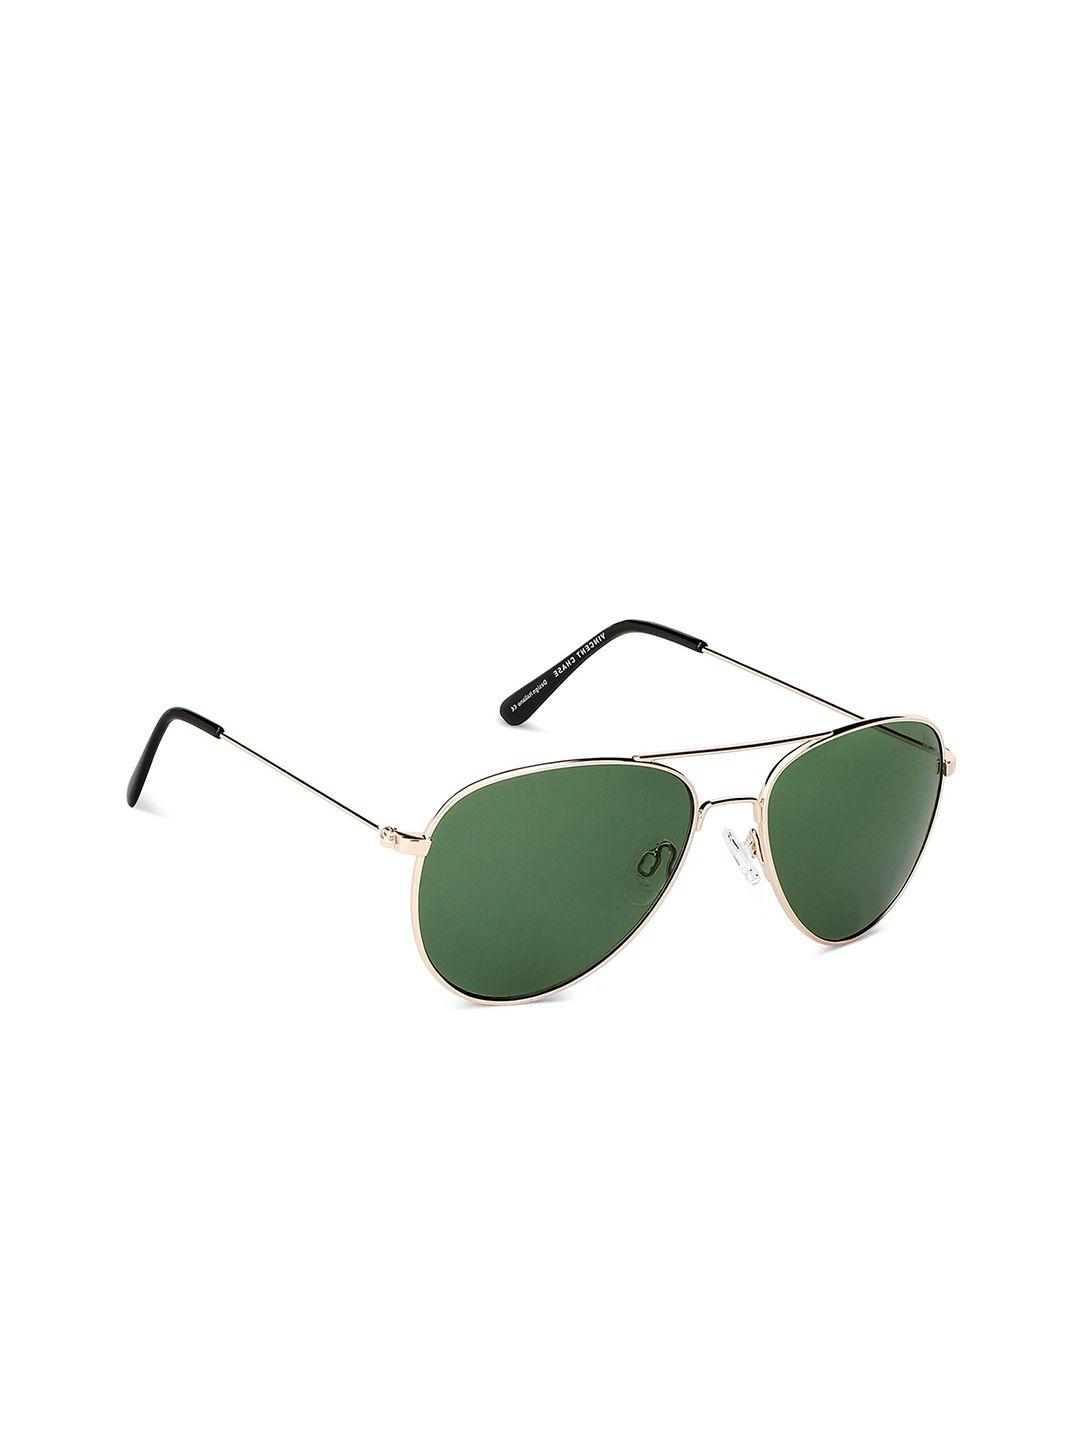 vincent chase unisex green lens & gold-toned aviator sunglasses with uv protected lens